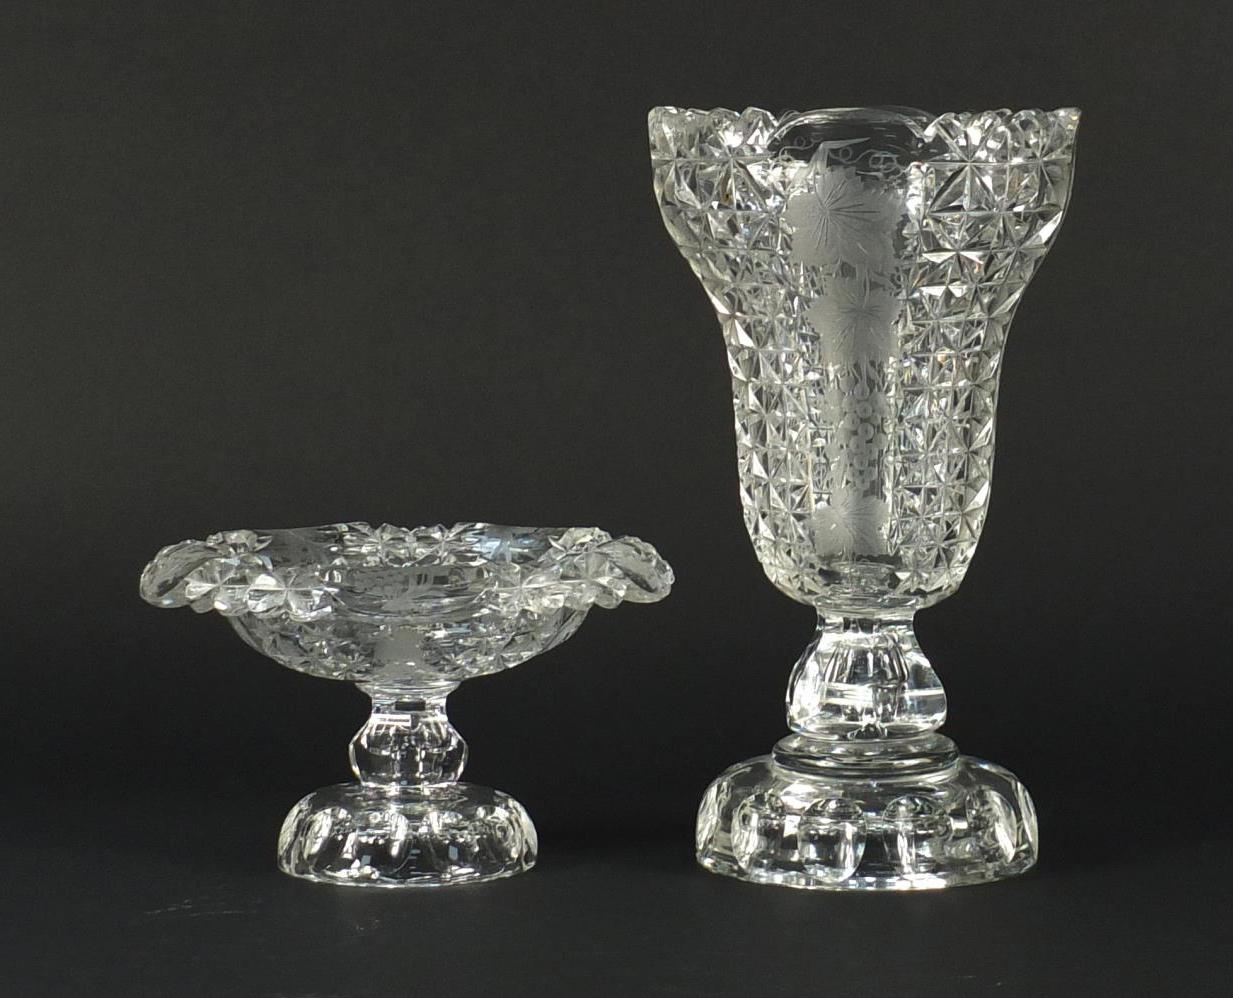 19th century cut glass vase and pedestal sweetmeat dish, etched with berries and leaves, the largest - Image 2 of 3